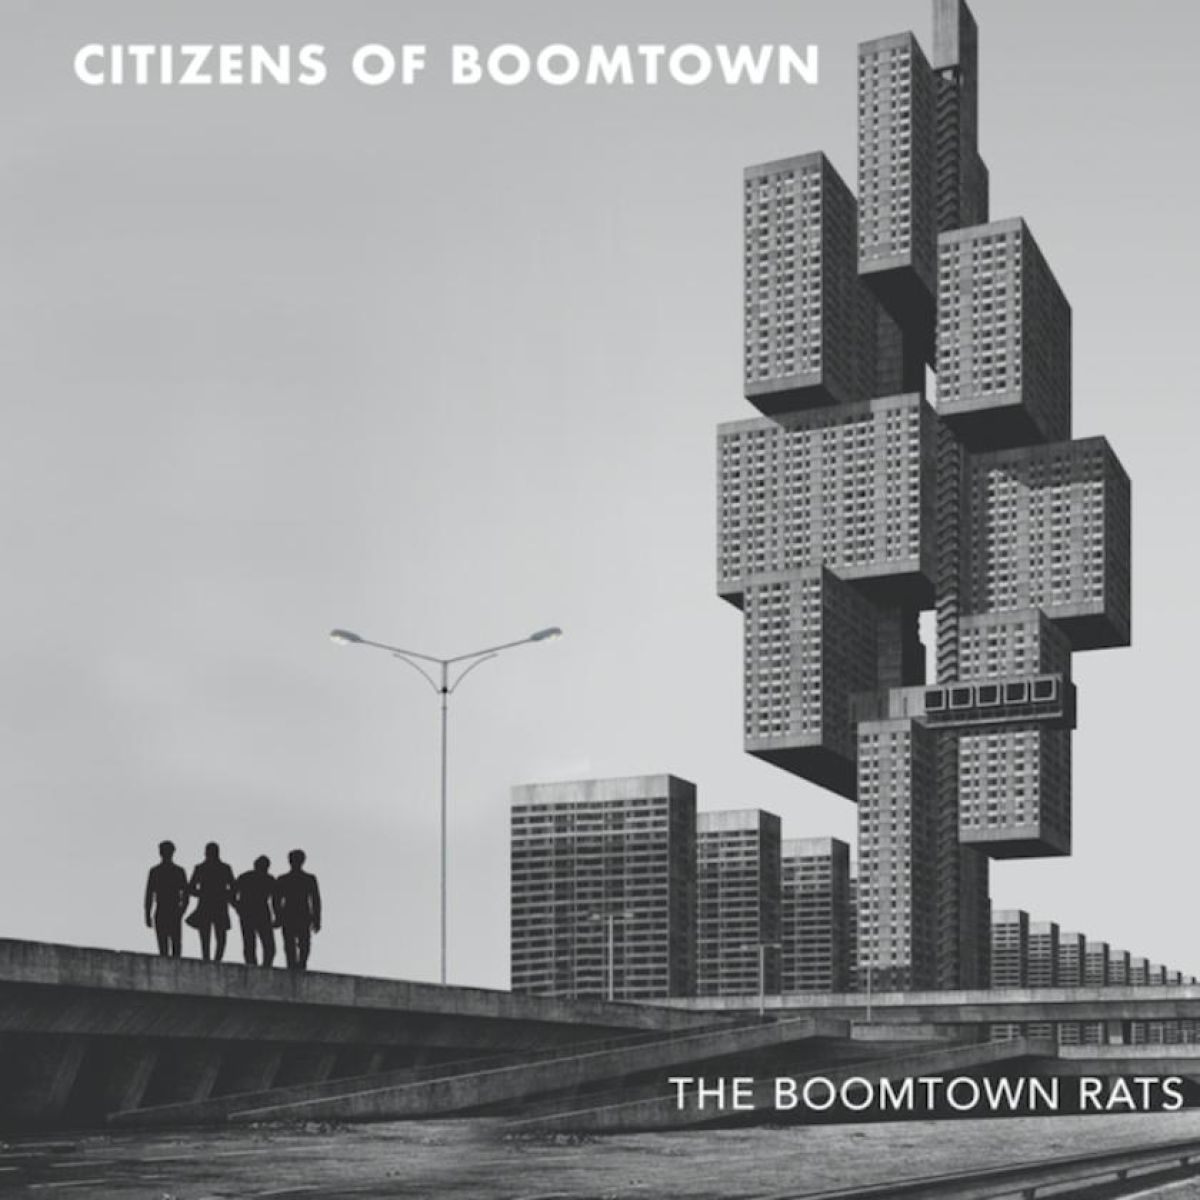 Album Review: The Boomtown Rats - Citizens of Boomtown - mxdwn Music